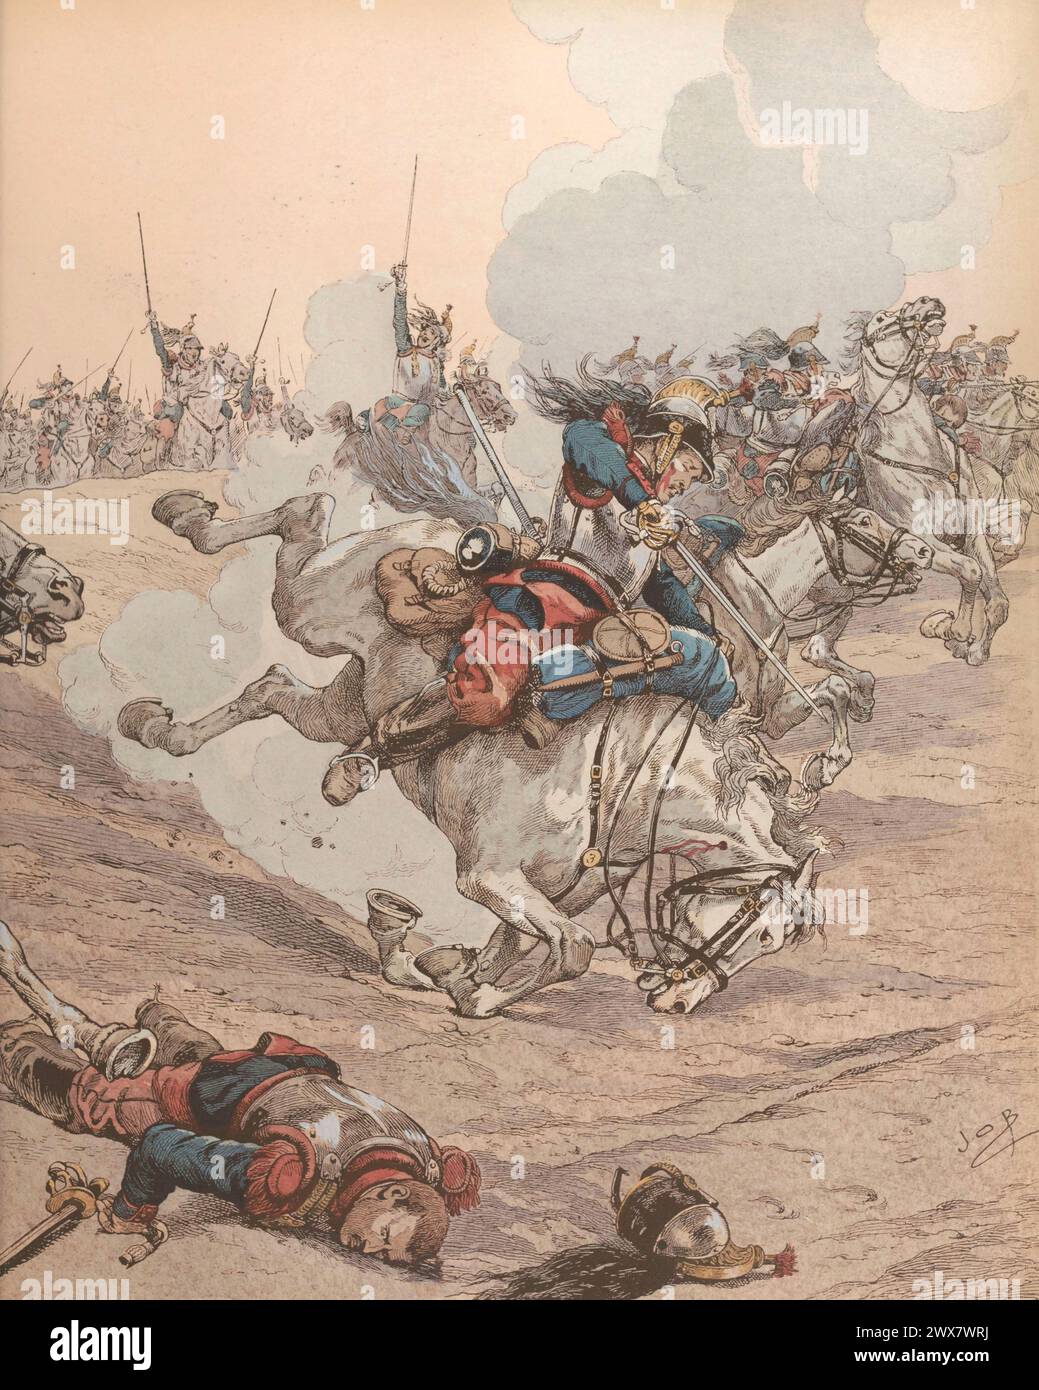 Franco-Prussian War of 1870-1871: French cuirassiers charge at the Battle of Wörth, 6 August 1870.  Illustration by Job published in the book 'Allons, Enfants de la Patrie !...' by Jean Richepin. Published by A. Mame et fils in 1920. Stock Photo